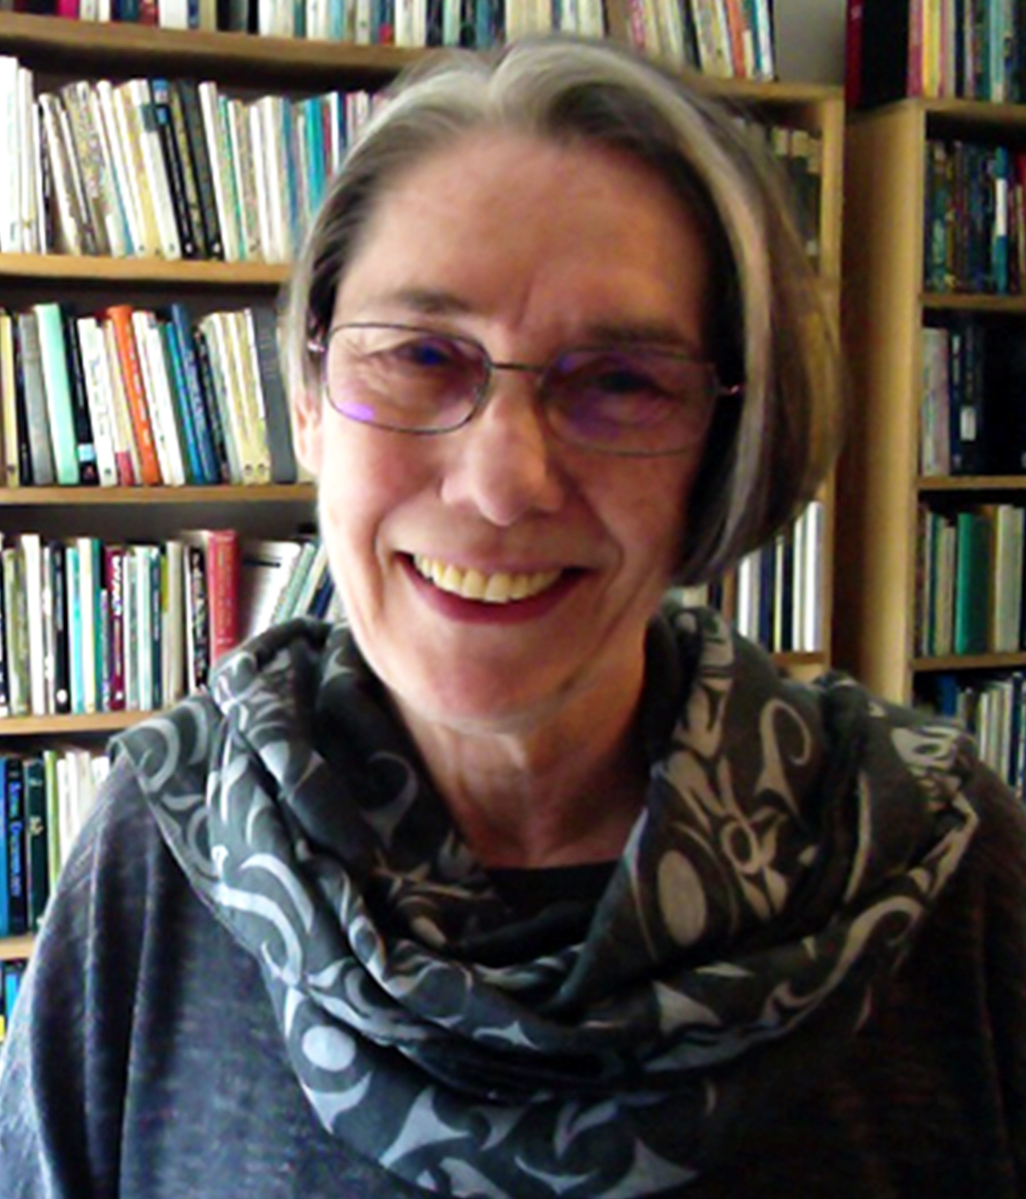 A white woman with gray hair and glasses, wearing a blue outfit, is in front of a bookcase and smiles at the camera.